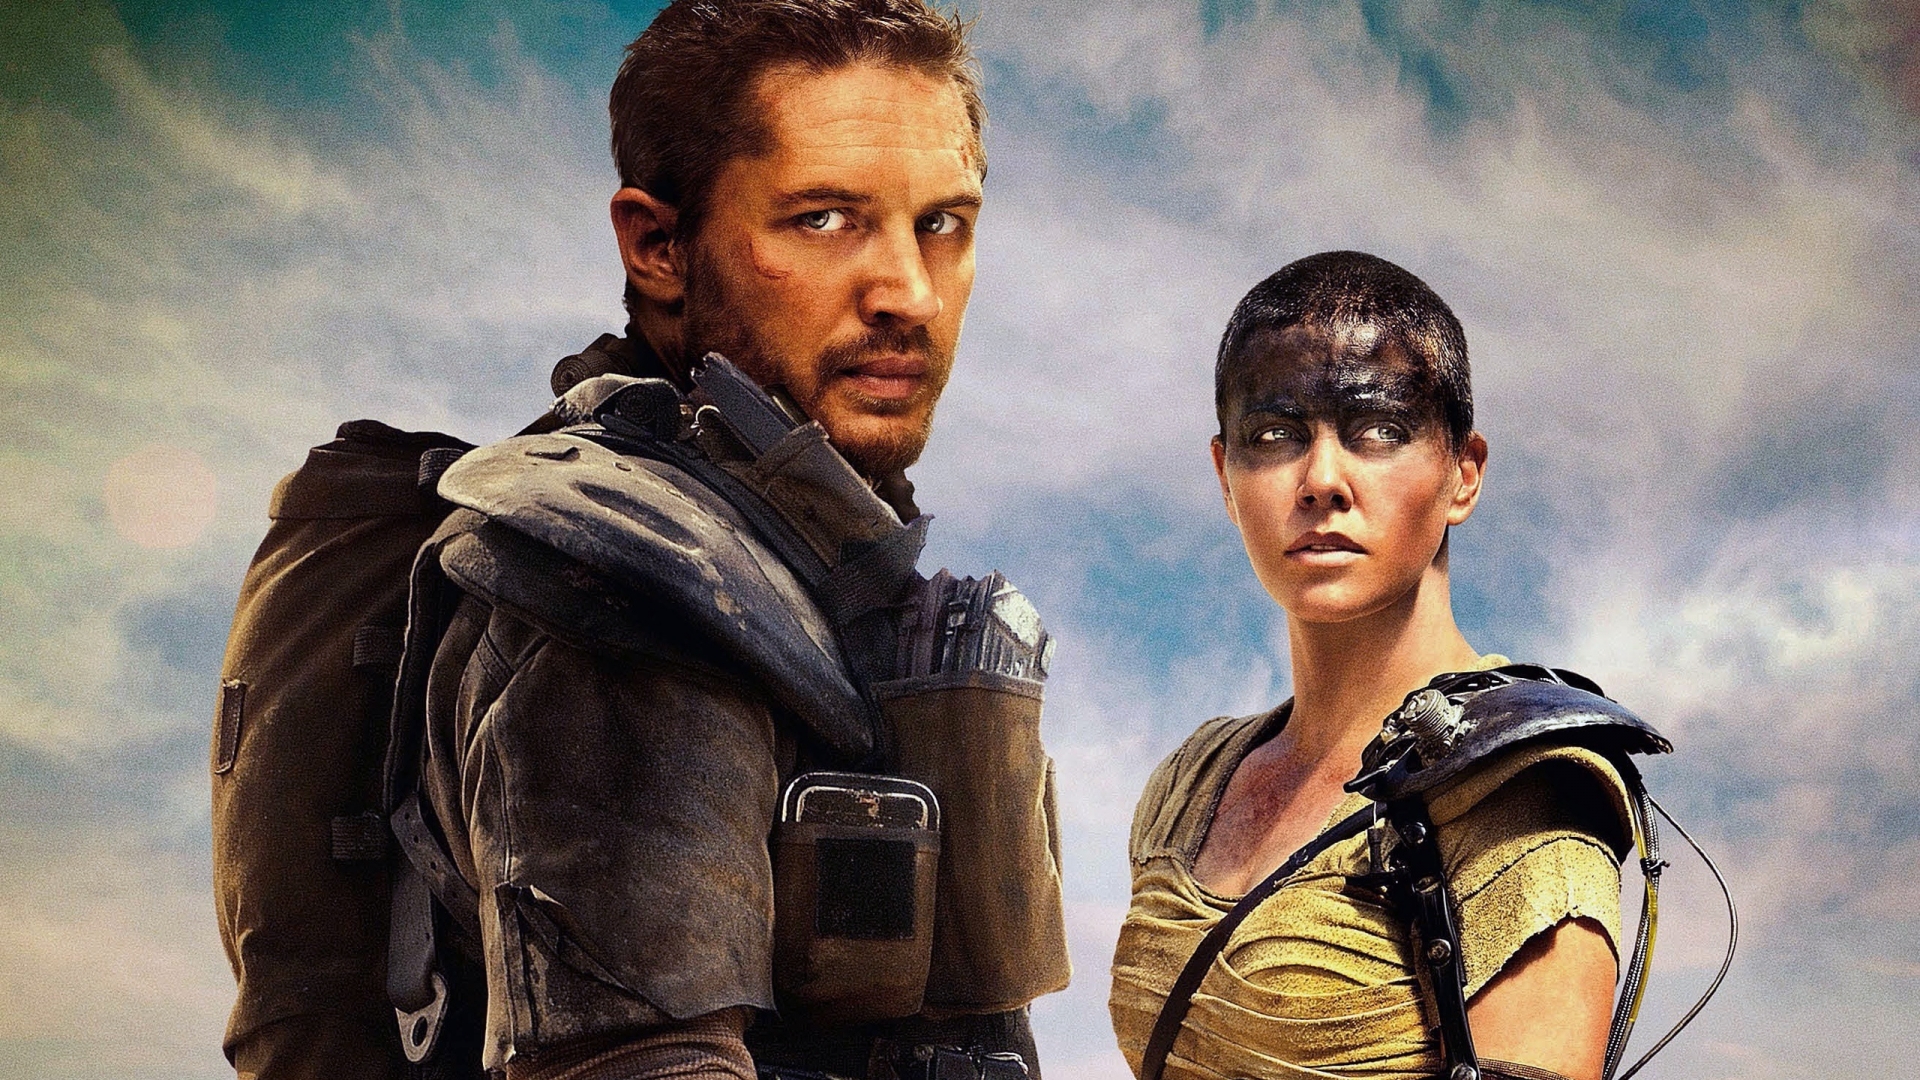 Mad Max 2015 Movie for 1920 x 1080 HDTV 1080p resolution